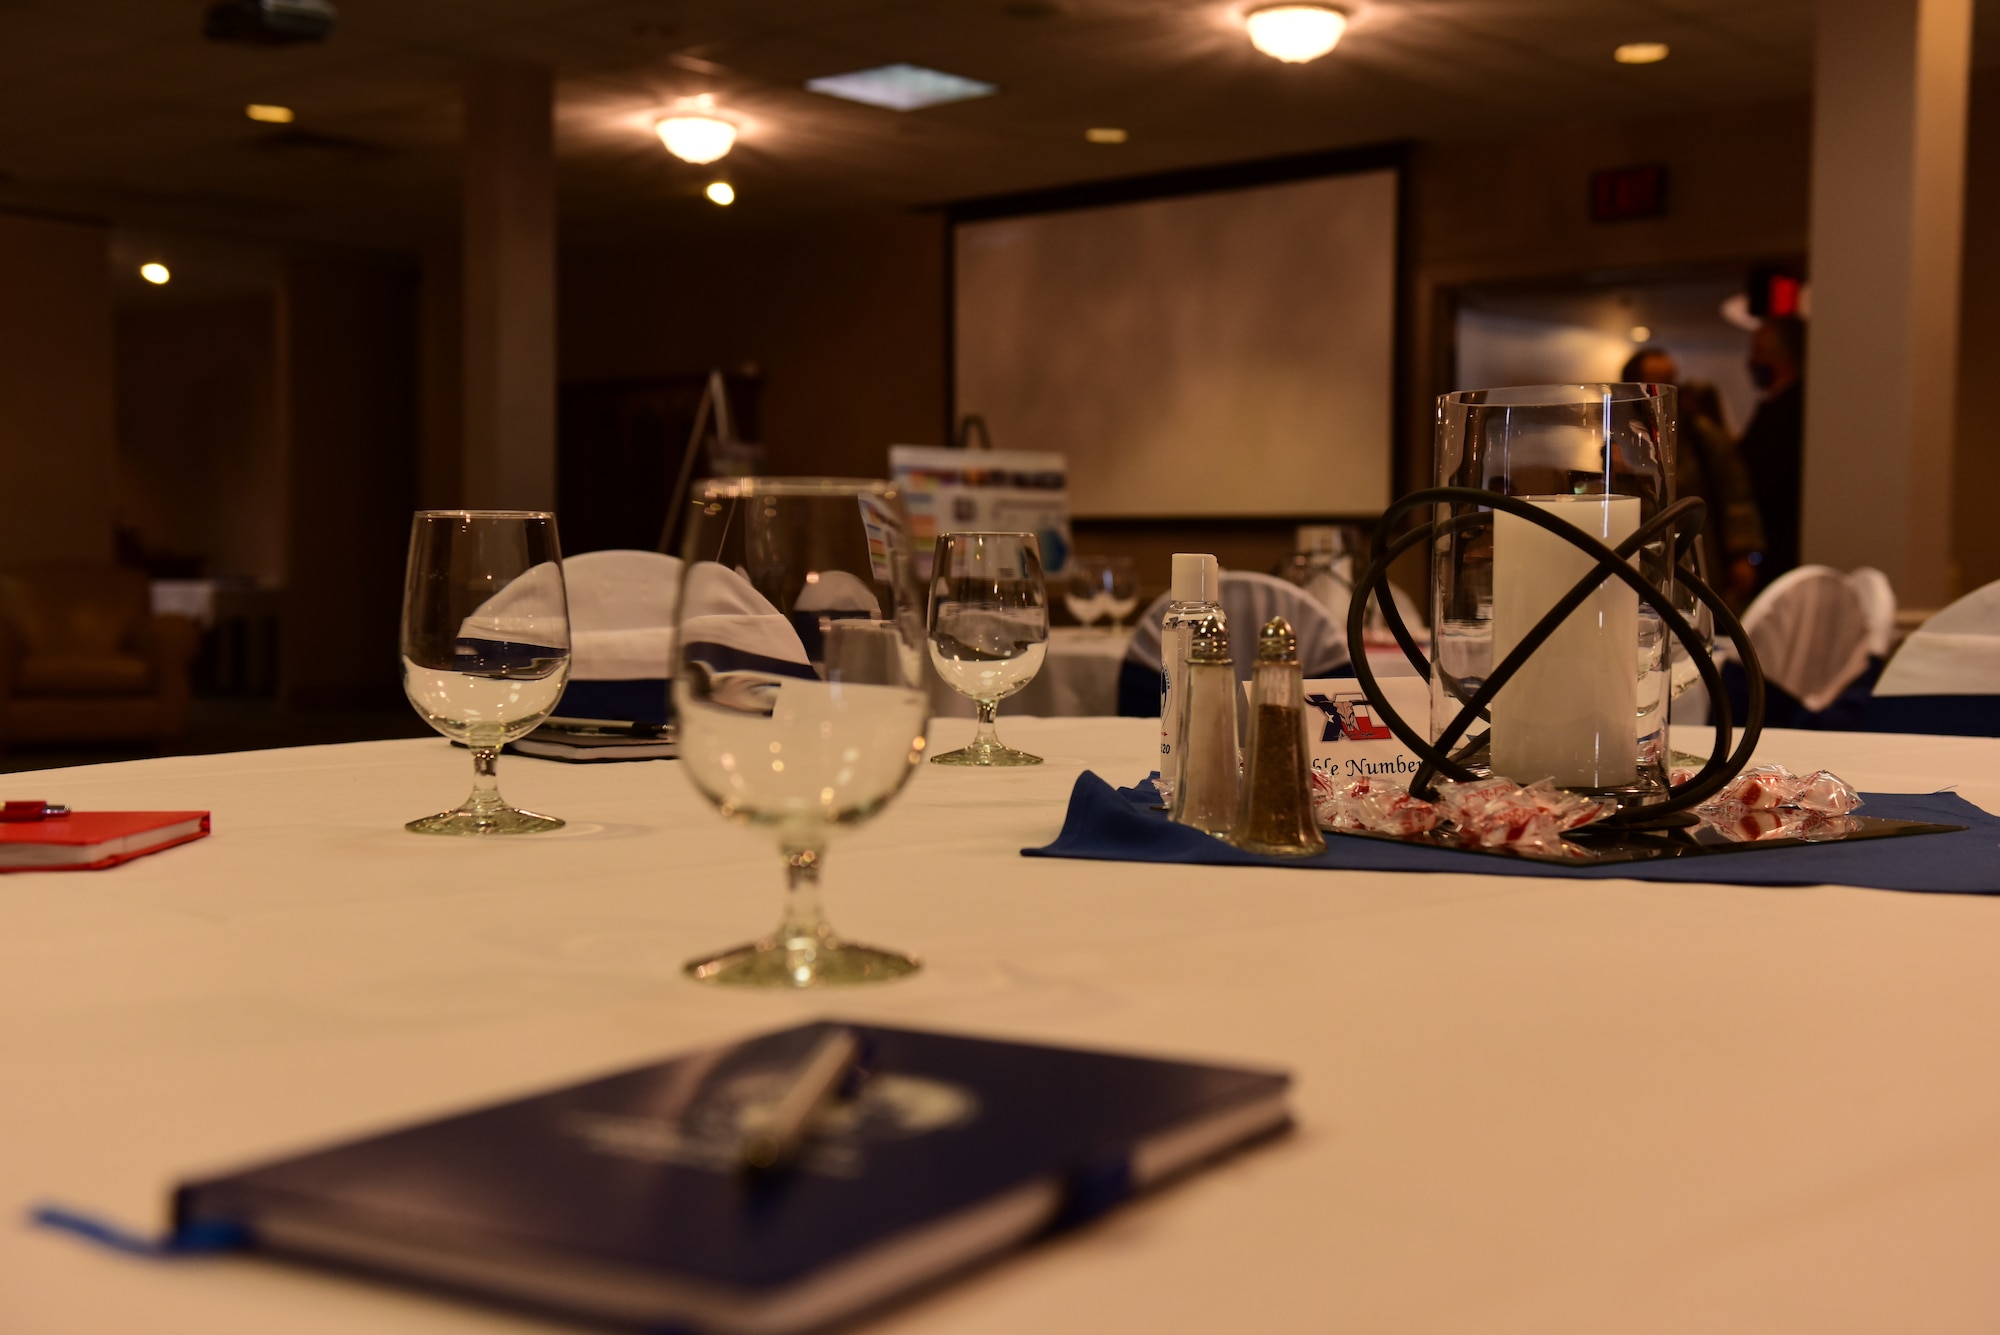 A table awaits for attendees for the first ever address to Laughlin Air Force Base, Texas on Apr. 26th 2021. This is the first ever modern address to Laughlin the meeting was to forecast future base projects to the local community. (U.S. Air Force photo by Airman 1st Class David Phaff)